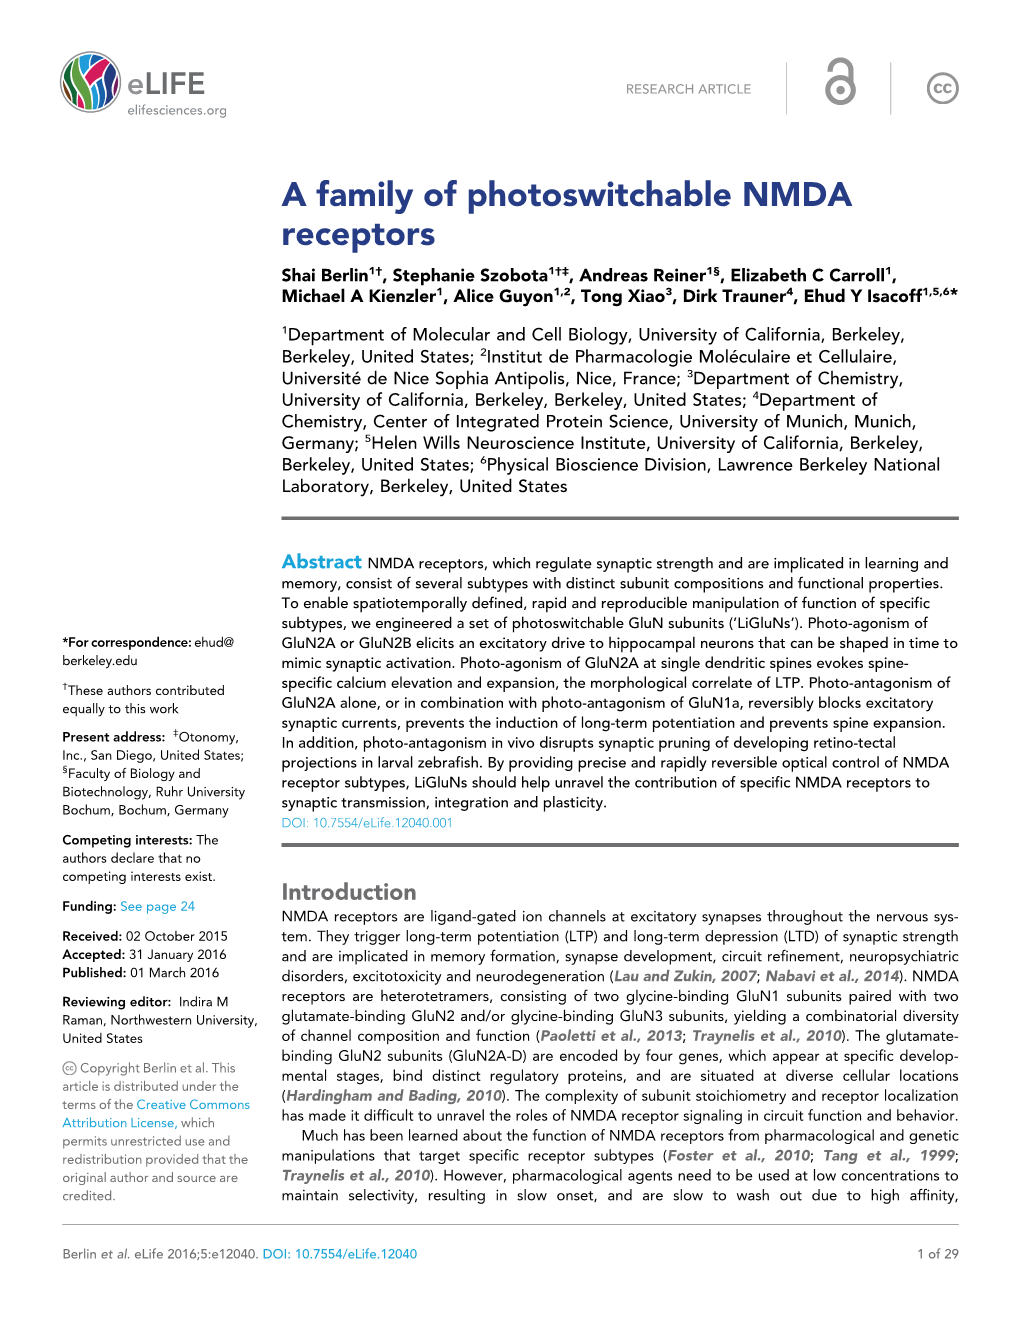 A Family of Photoswitchable NMDA Receptors